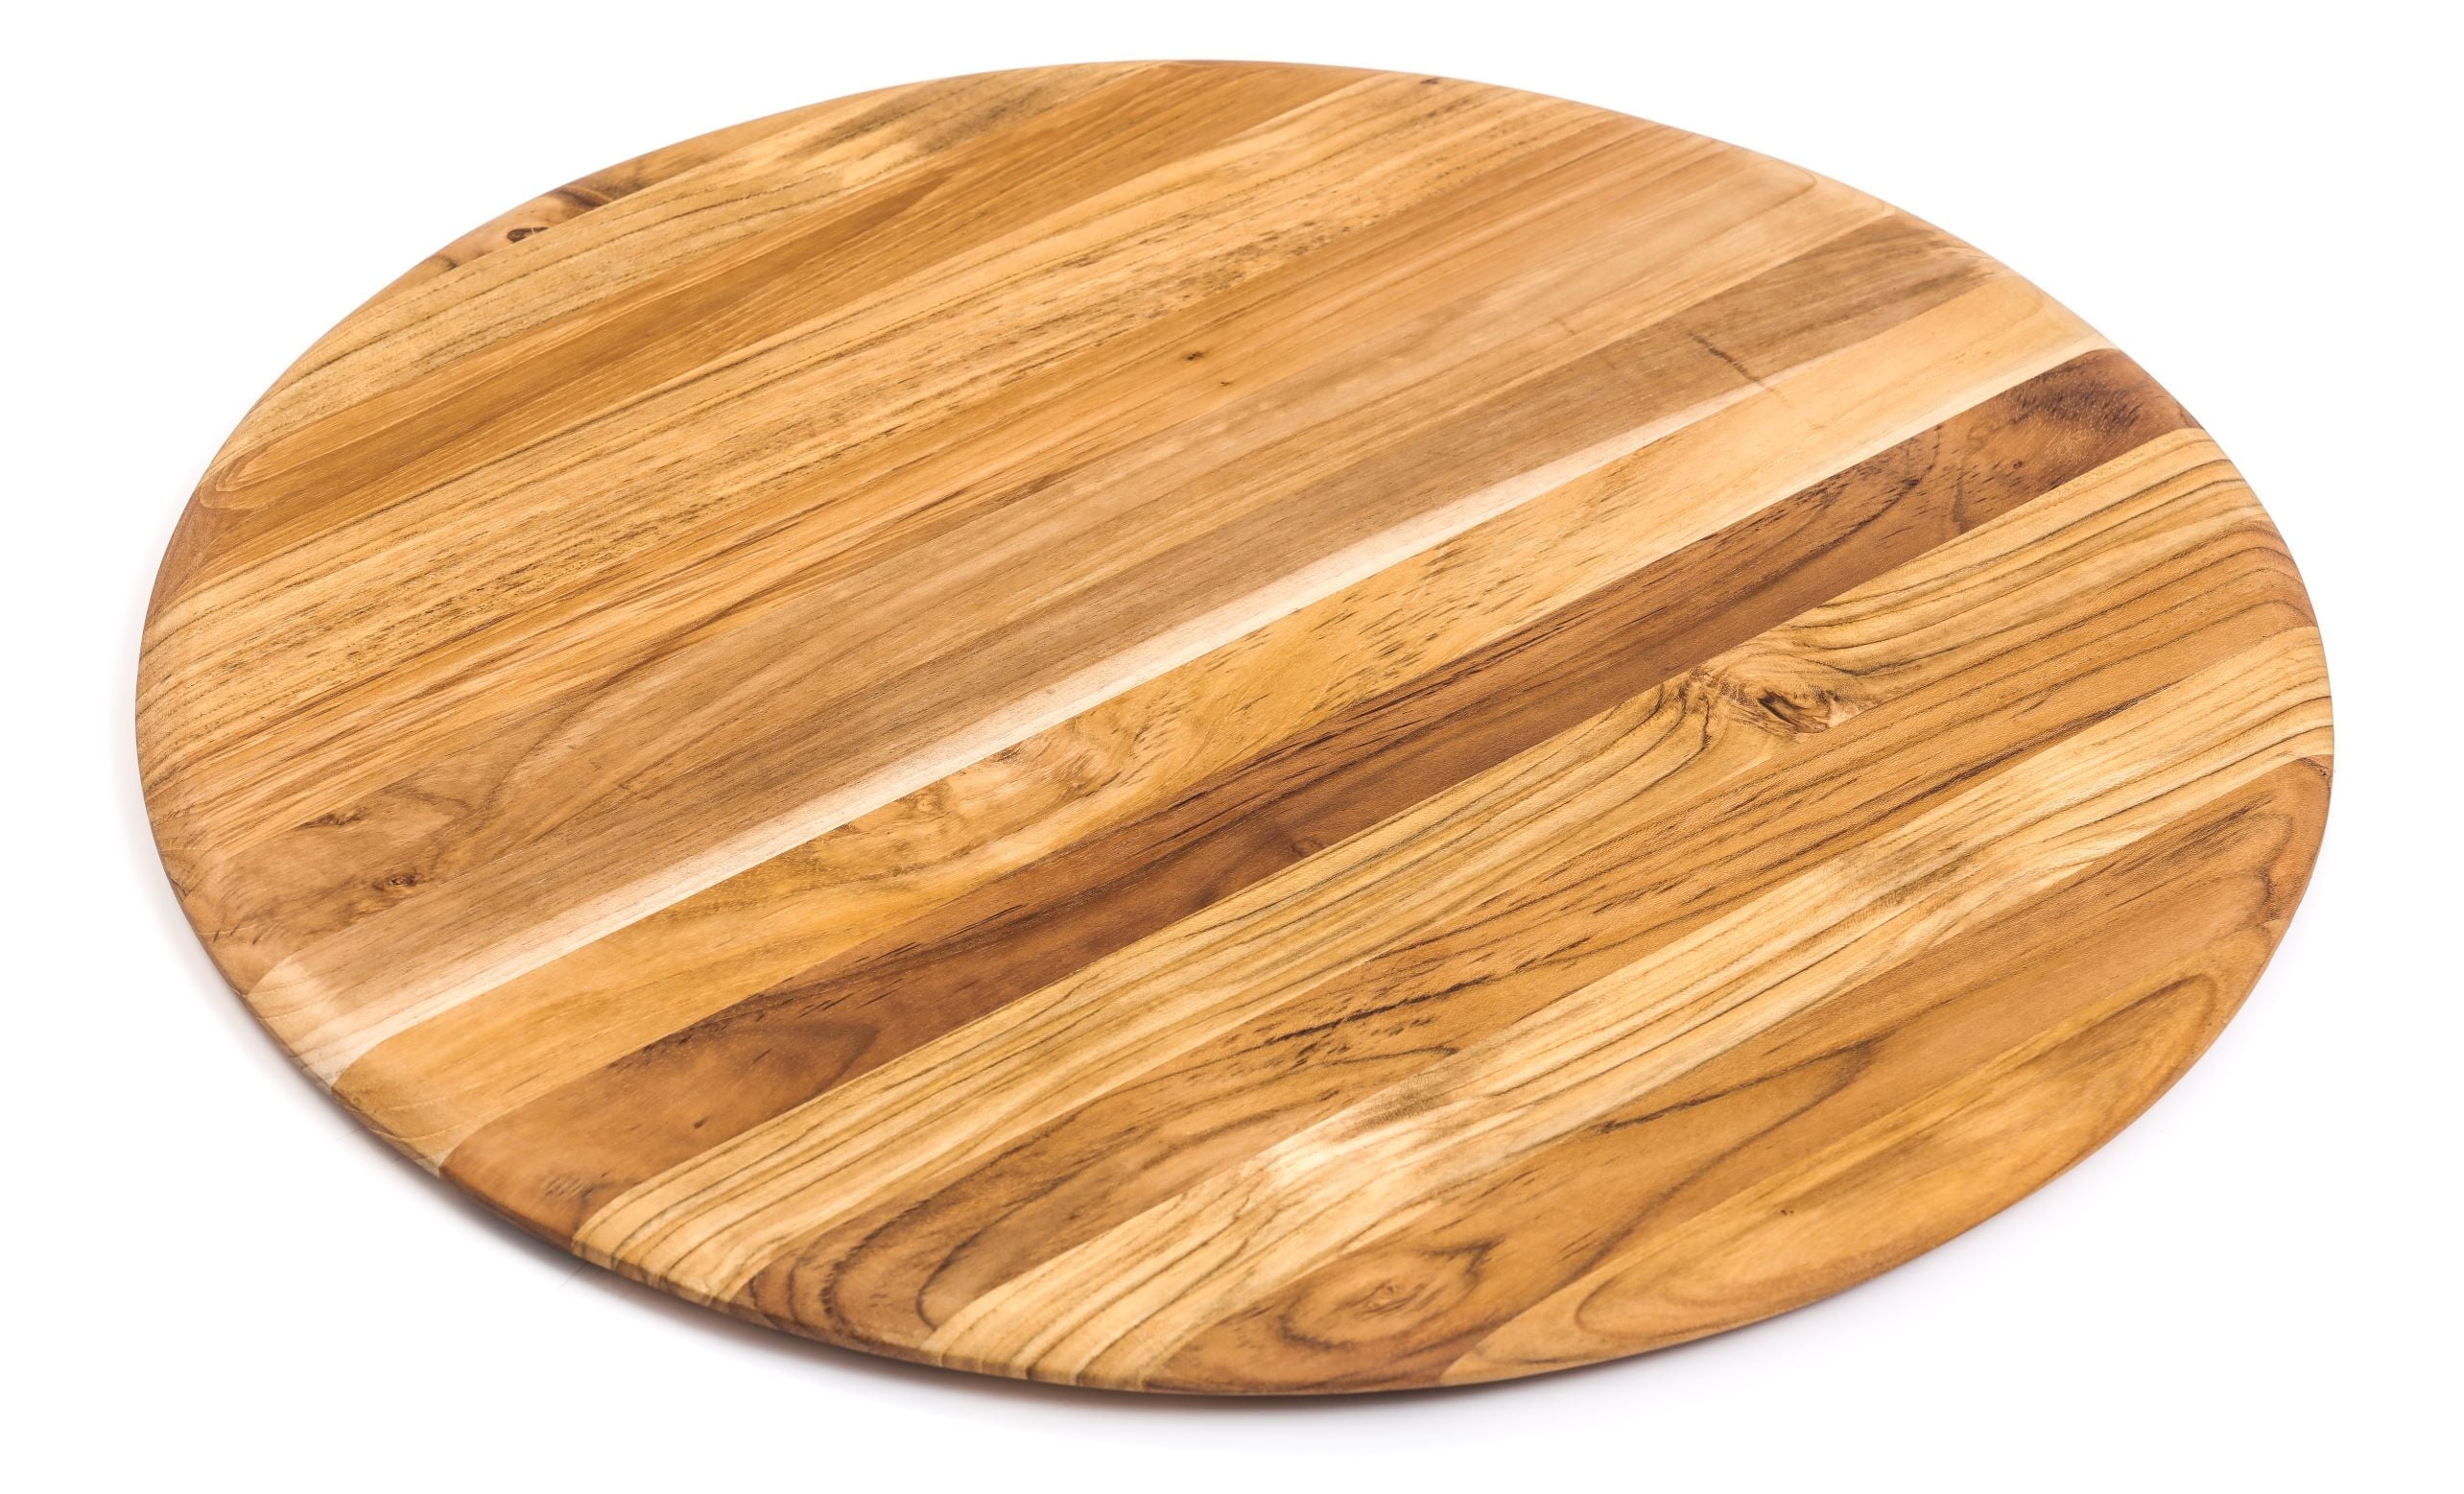 Carving Recycled Teak Wood Cutting board by Chic Teak only $79.38